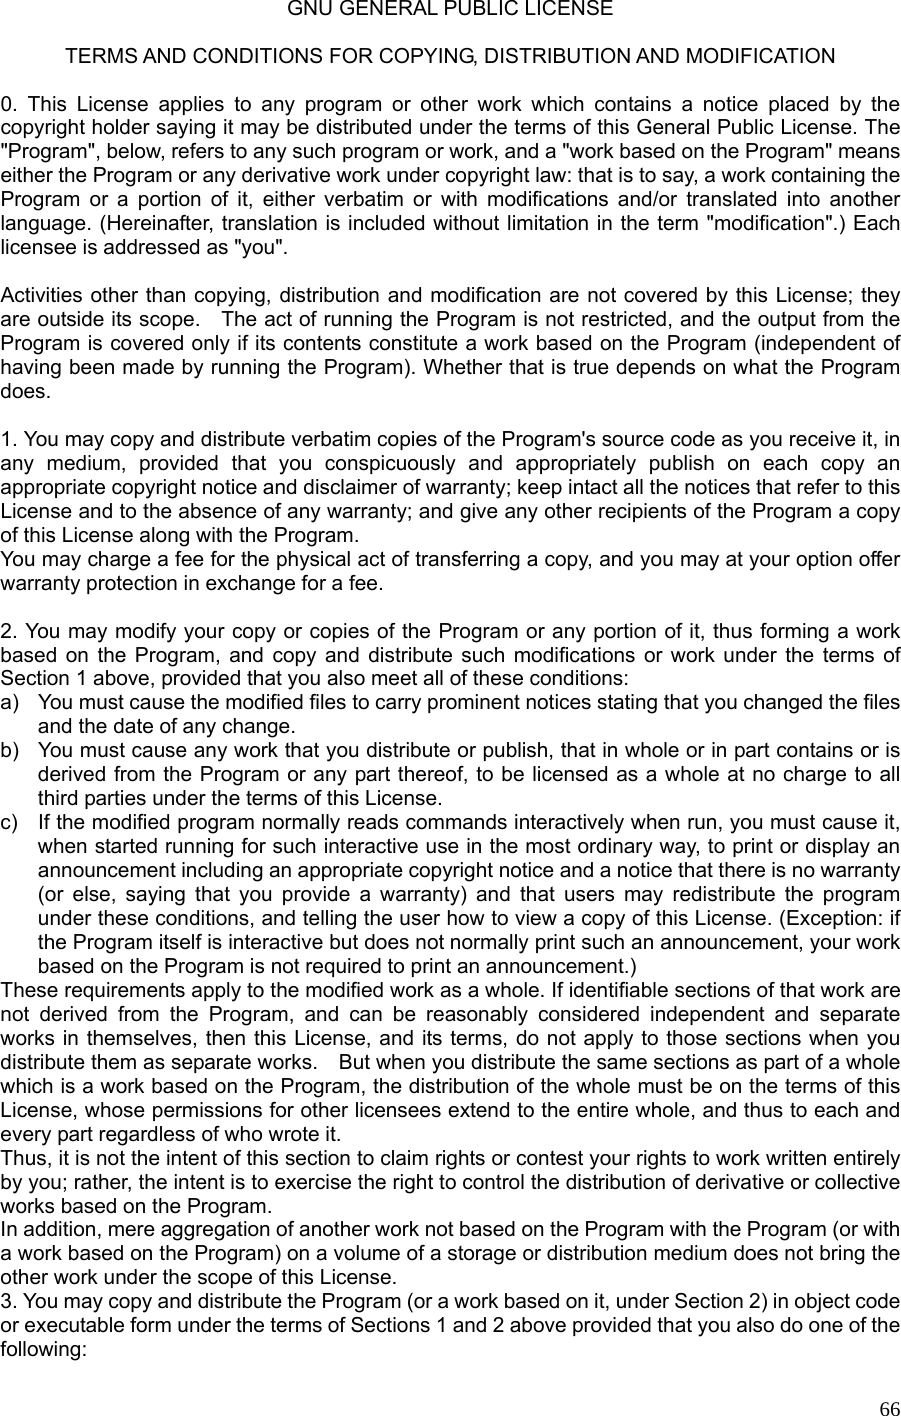  66GNU GENERAL PUBLIC LICENSE  TERMS AND CONDITIONS FOR COPYING, DISTRIBUTION AND MODIFICATION  0. This License applies to any program or other work which contains a notice placed by the copyright holder saying it may be distributed under the terms of this General Public License. The &quot;Program&quot;, below, refers to any such program or work, and a &quot;work based on the Program&quot; means either the Program or any derivative work under copyright law: that is to say, a work containing the Program or a portion of it, either verbatim or with modifications and/or translated into another language. (Hereinafter, translation is included without limitation in the term &quot;modification&quot;.) Each licensee is addressed as &quot;you&quot;.  Activities other than copying, distribution and modification are not covered by this License; they are outside its scope.    The act of running the Program is not restricted, and the output from the Program is covered only if its contents constitute a work based on the Program (independent of having been made by running the Program). Whether that is true depends on what the Program does.  1. You may copy and distribute verbatim copies of the Program&apos;s source code as you receive it, in any medium, provided that you conspicuously and appropriately publish on each copy an appropriate copyright notice and disclaimer of warranty; keep intact all the notices that refer to this License and to the absence of any warranty; and give any other recipients of the Program a copy of this License along with the Program. You may charge a fee for the physical act of transferring a copy, and you may at your option offer warranty protection in exchange for a fee.  2. You may modify your copy or copies of the Program or any portion of it, thus forming a work based on the Program, and copy and distribute such modifications or work under the terms of Section 1 above, provided that you also meet all of these conditions: a)  You must cause the modified files to carry prominent notices stating that you changed the files and the date of any change. b)  You must cause any work that you distribute or publish, that in whole or in part contains or is derived from the Program or any part thereof, to be licensed as a whole at no charge to all third parties under the terms of this License. c)  If the modified program normally reads commands interactively when run, you must cause it, when started running for such interactive use in the most ordinary way, to print or display an announcement including an appropriate copyright notice and a notice that there is no warranty (or else, saying that you provide a warranty) and that users may redistribute the program under these conditions, and telling the user how to view a copy of this License. (Exception: if the Program itself is interactive but does not normally print such an announcement, your work based on the Program is not required to print an announcement.) These requirements apply to the modified work as a whole. If identifiable sections of that work are not derived from the Program, and can be reasonably considered independent and separate works in themselves, then this License, and its terms, do not apply to those sections when you distribute them as separate works.    But when you distribute the same sections as part of a whole which is a work based on the Program, the distribution of the whole must be on the terms of this License, whose permissions for other licensees extend to the entire whole, and thus to each and every part regardless of who wrote it. Thus, it is not the intent of this section to claim rights or contest your rights to work written entirely by you; rather, the intent is to exercise the right to control the distribution of derivative or collective works based on the Program. In addition, mere aggregation of another work not based on the Program with the Program (or with a work based on the Program) on a volume of a storage or distribution medium does not bring the other work under the scope of this License. 3. You may copy and distribute the Program (or a work based on it, under Section 2) in object code or executable form under the terms of Sections 1 and 2 above provided that you also do one of the following: 